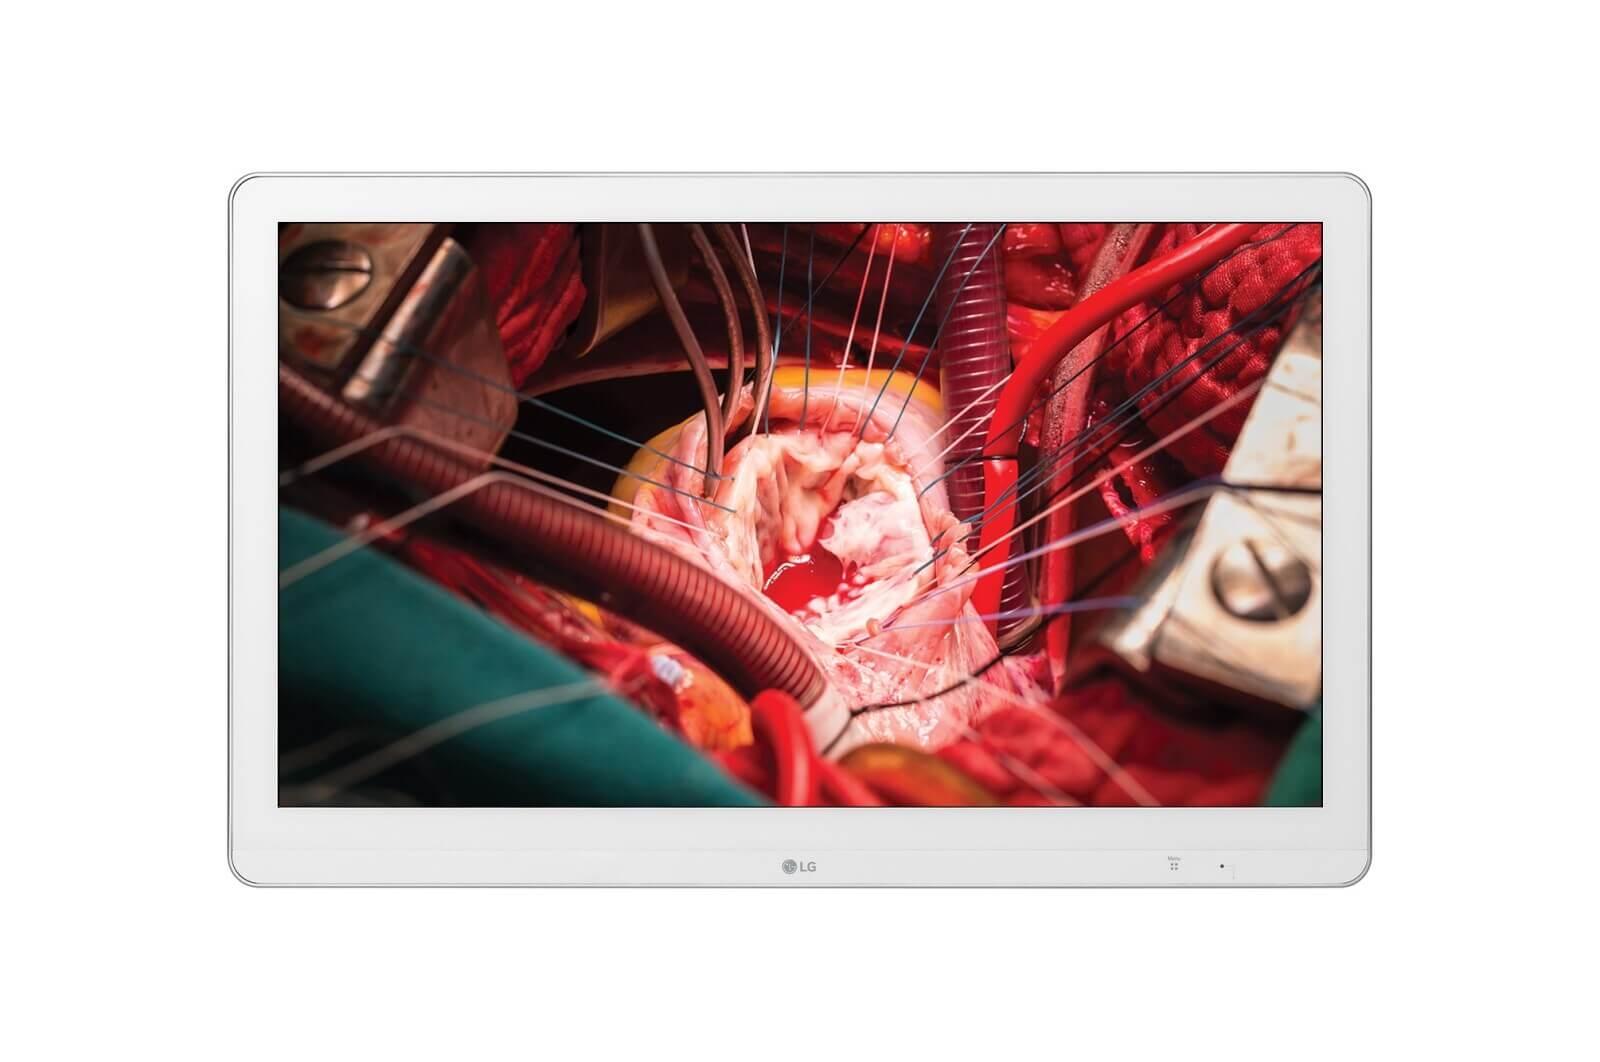 Medical display LG 27HK510S-W Surgical Monitor features a resolution of 1920 x 1080 